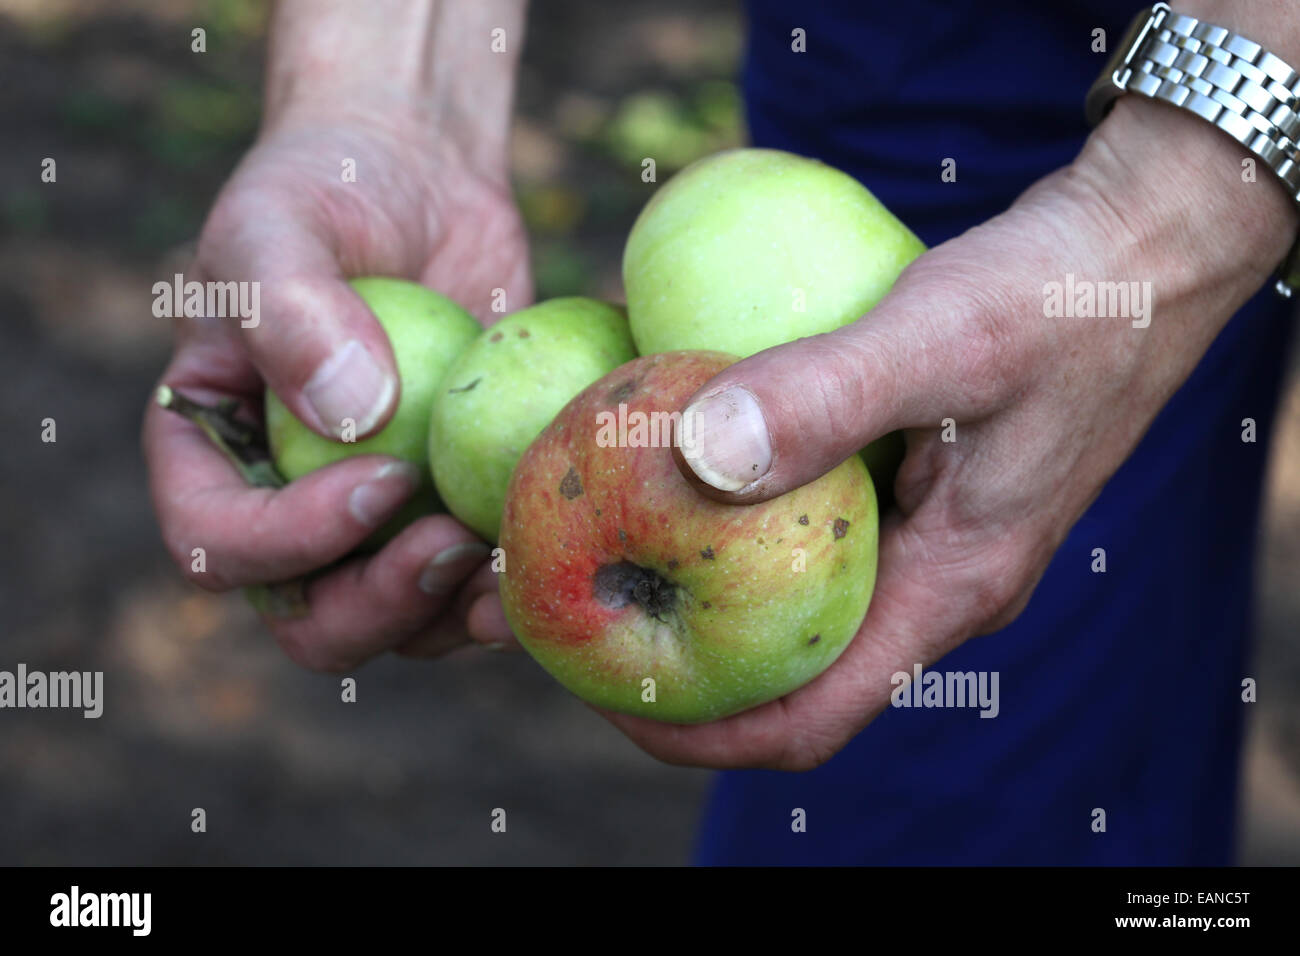 Close-up of hands harvesting apples in an urban gardening project Stock Photo